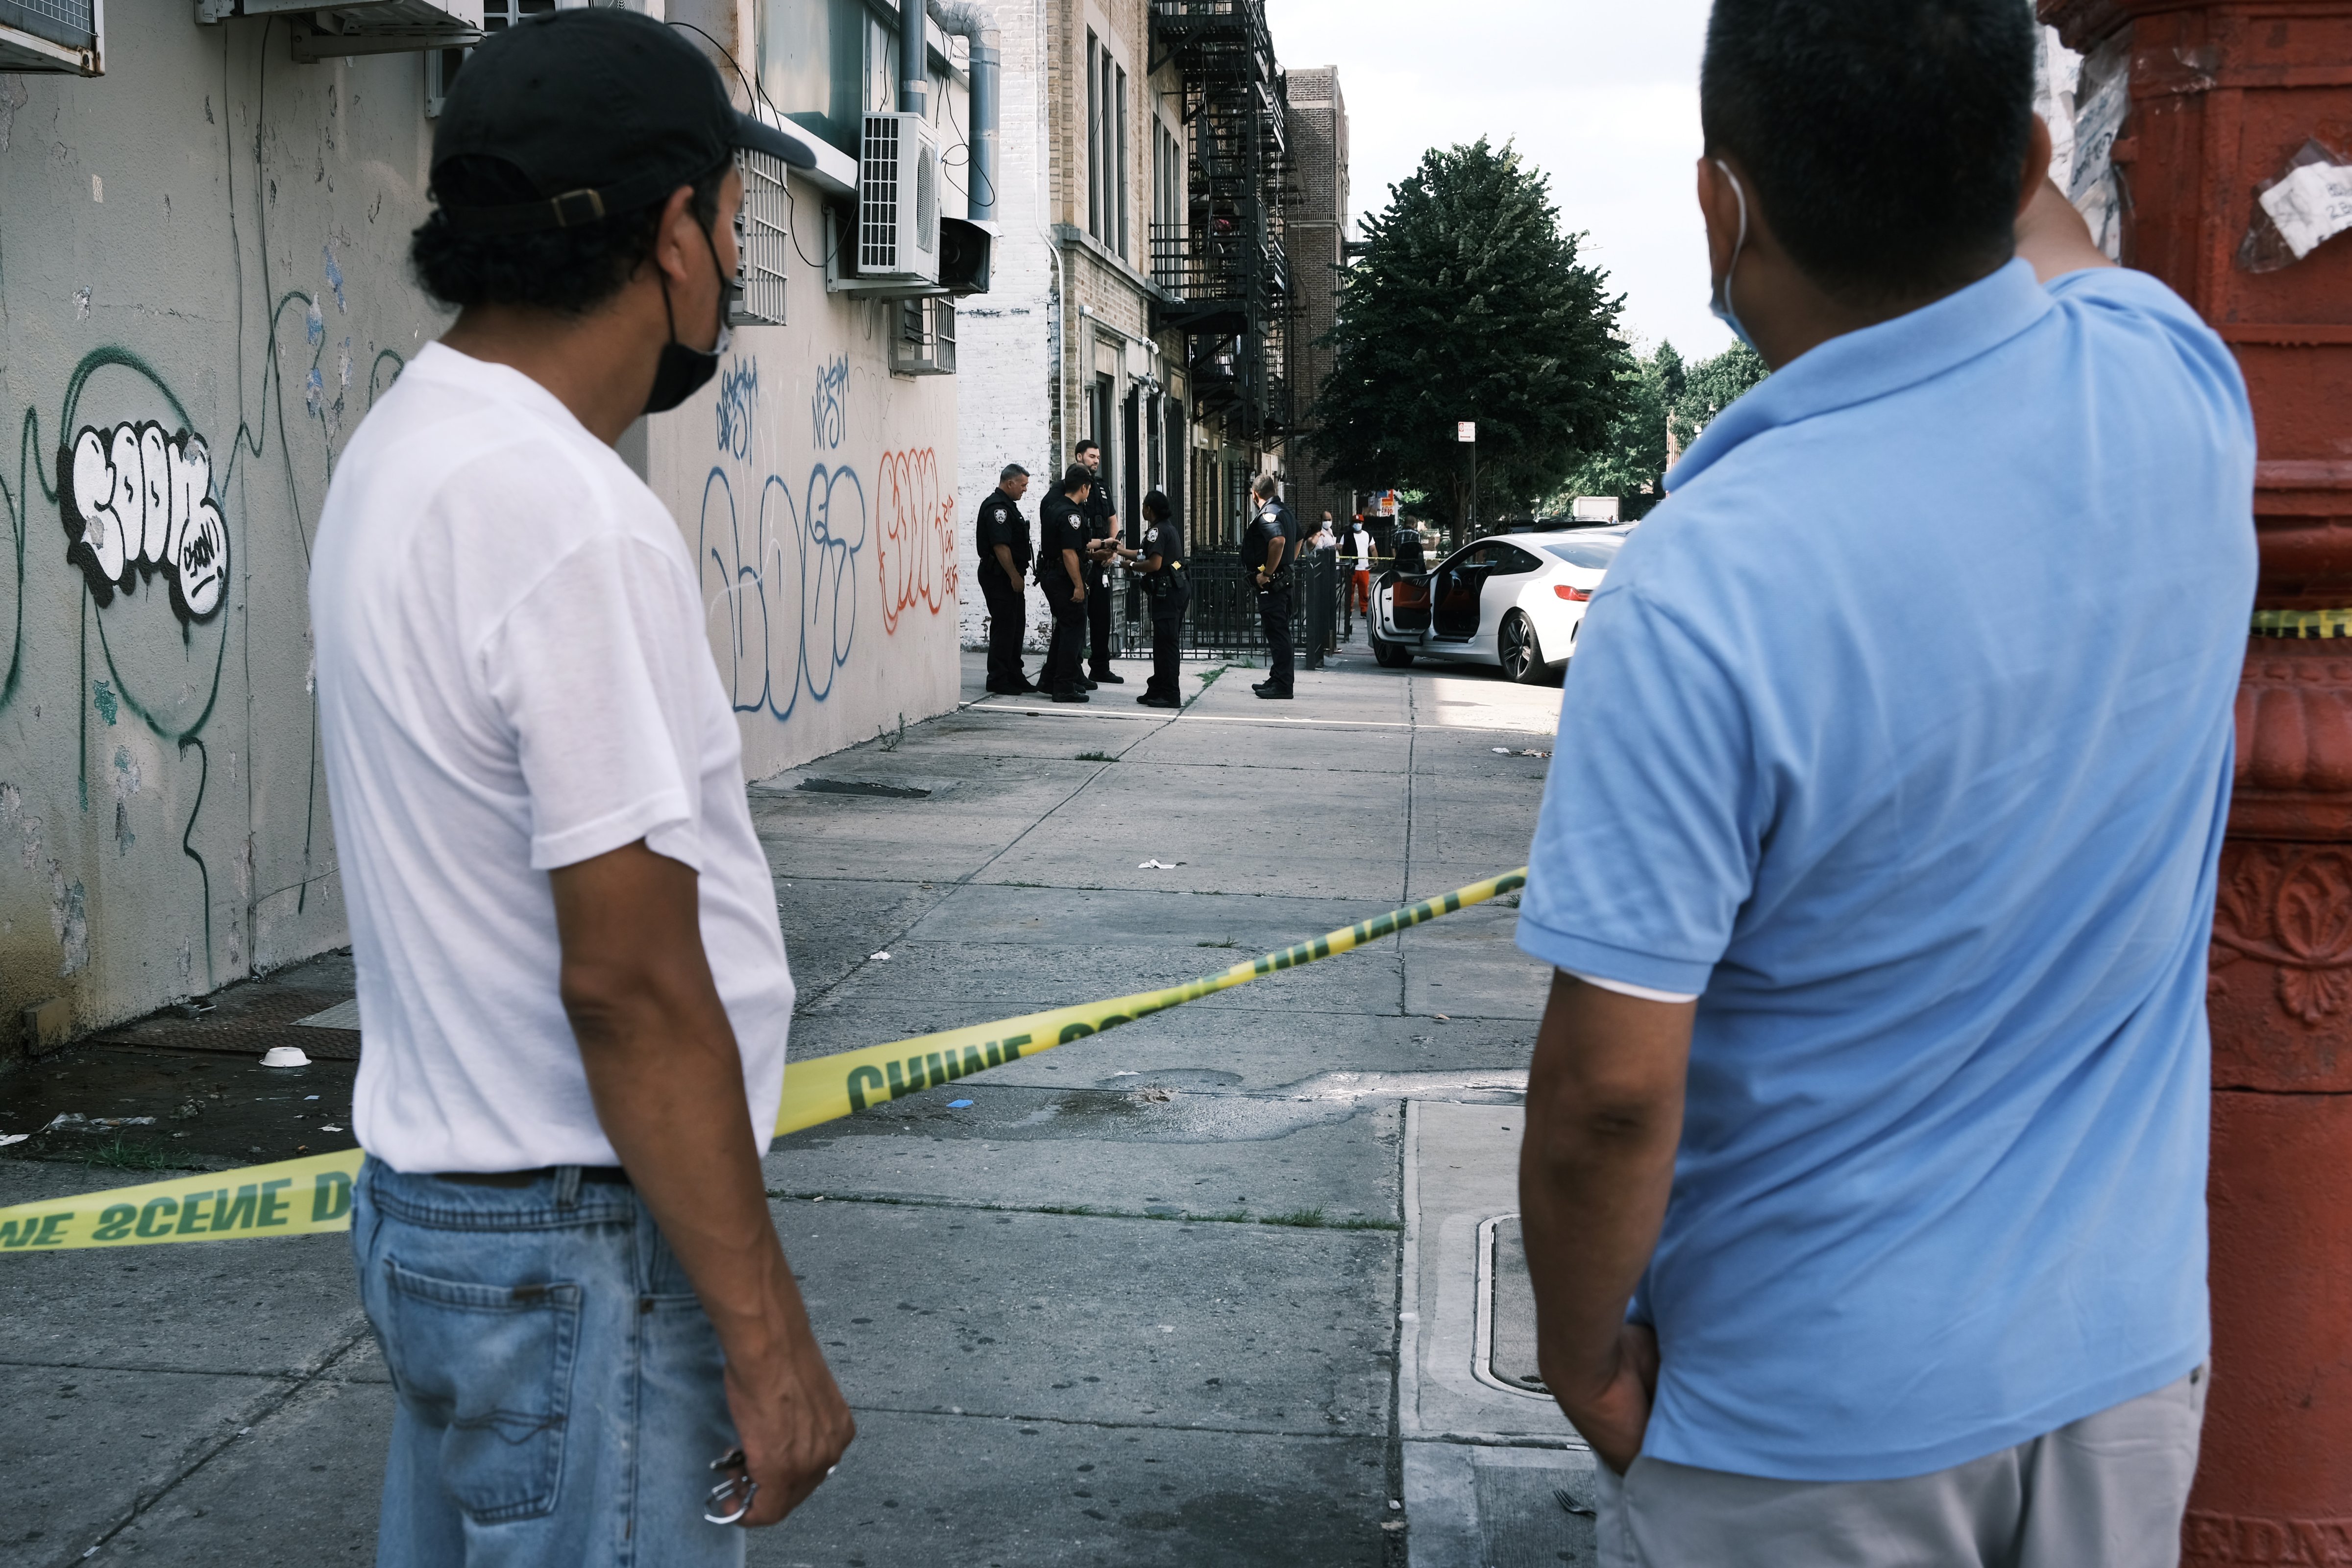 People look on as police converge on the scene of a shooting in Brooklyn, one of numerous during the day, on July 14, 2021 in New York City. (Spencer Platt—Getty Images)